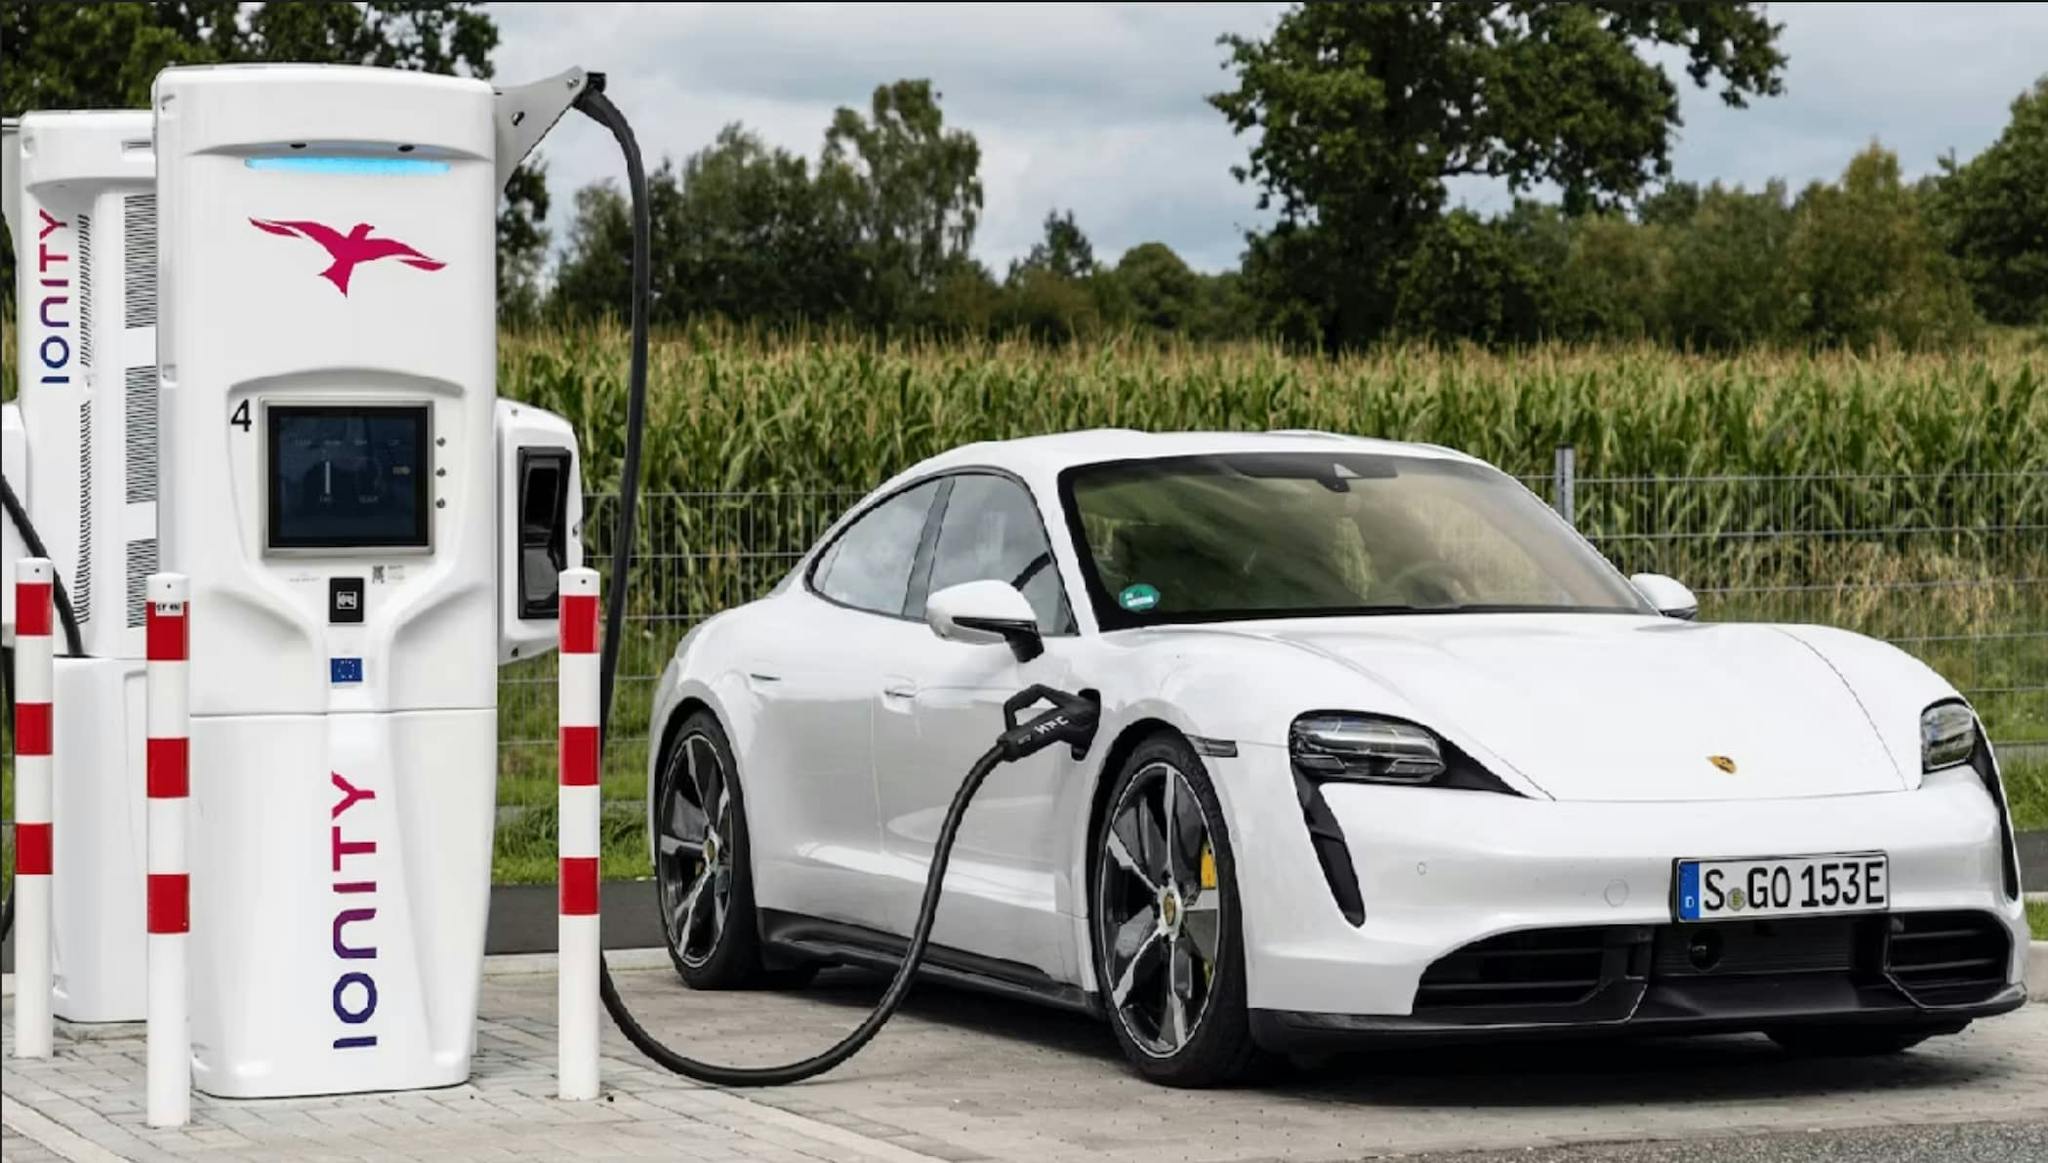 5 Fastest Charging Electric Cars Zecar Resources List